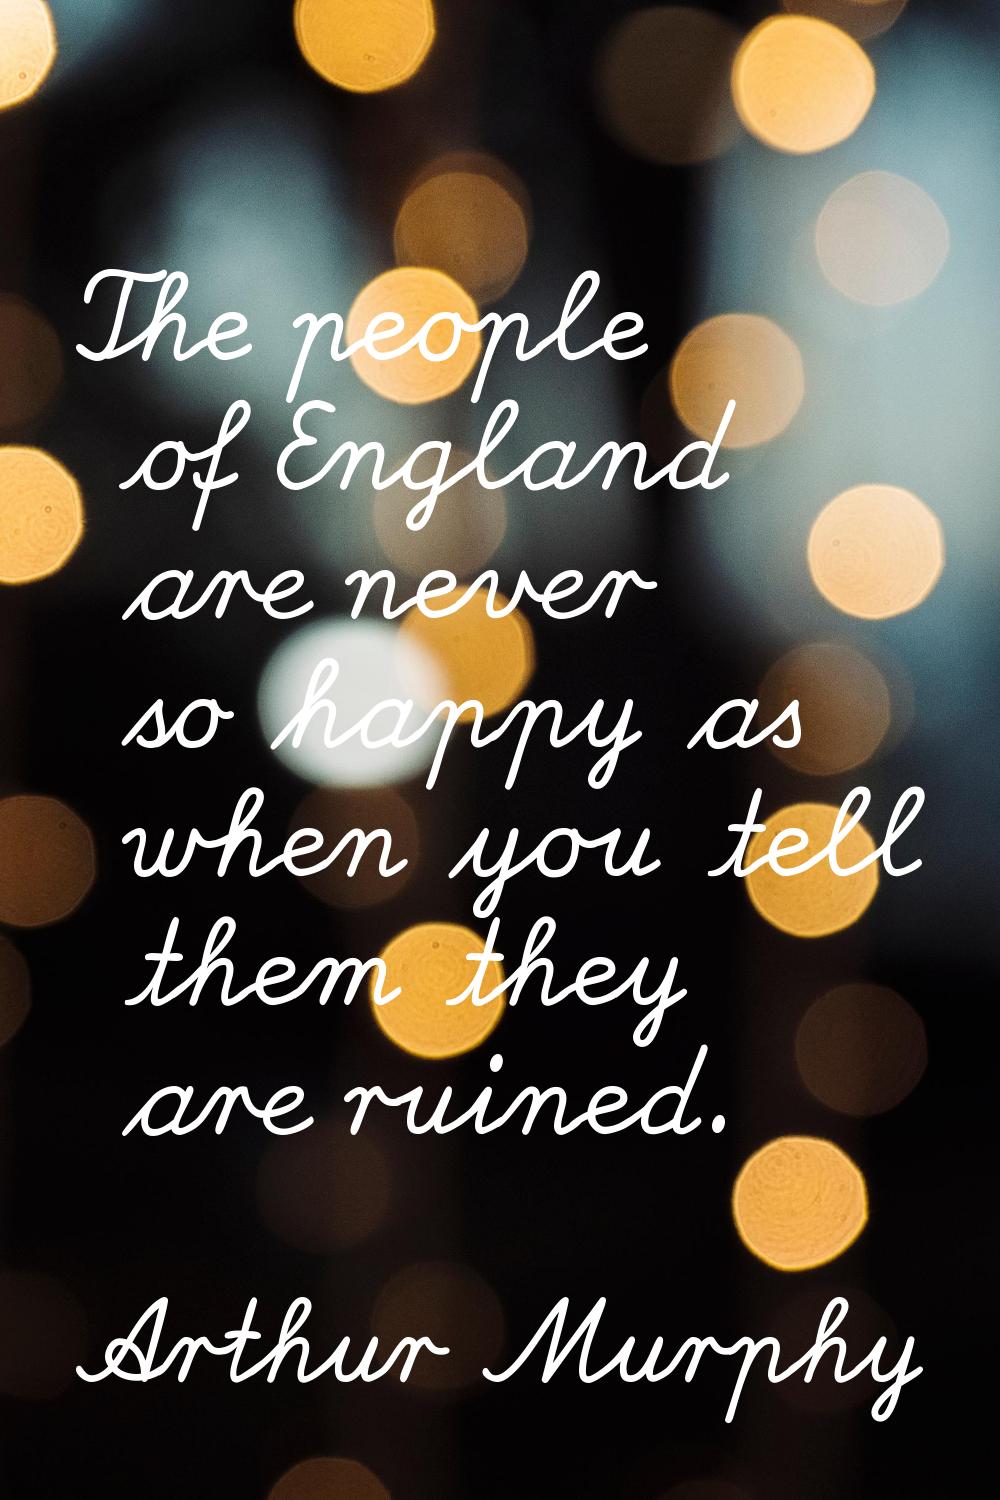 The people of England are never so happy as when you tell them they are ruined.